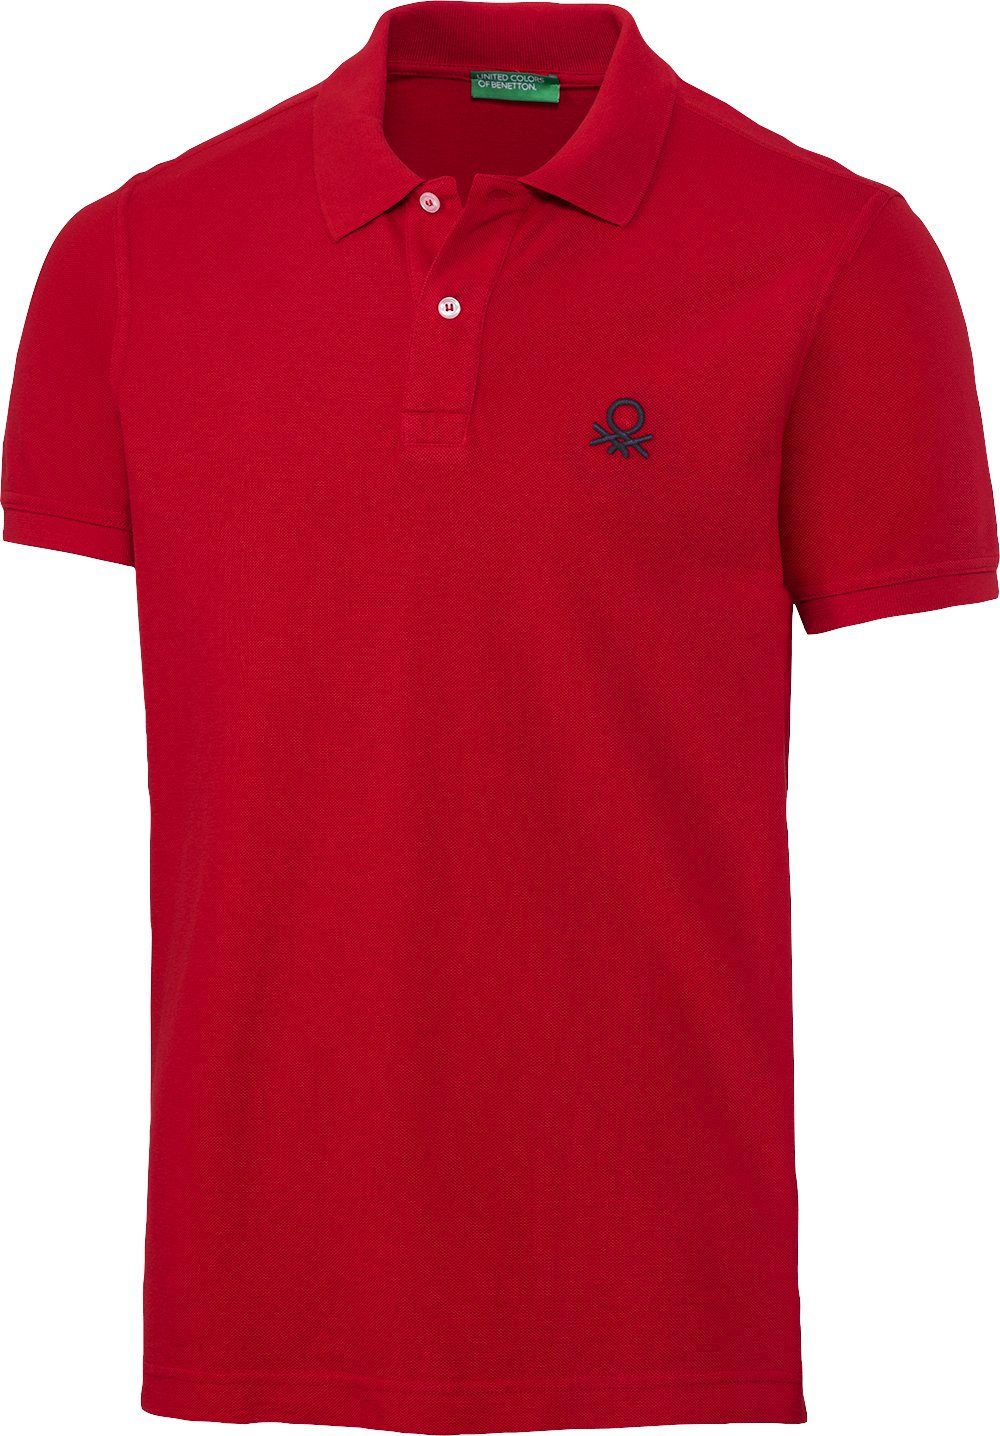 United Poloshirt Benetton Baumwolle rot aus of Colors